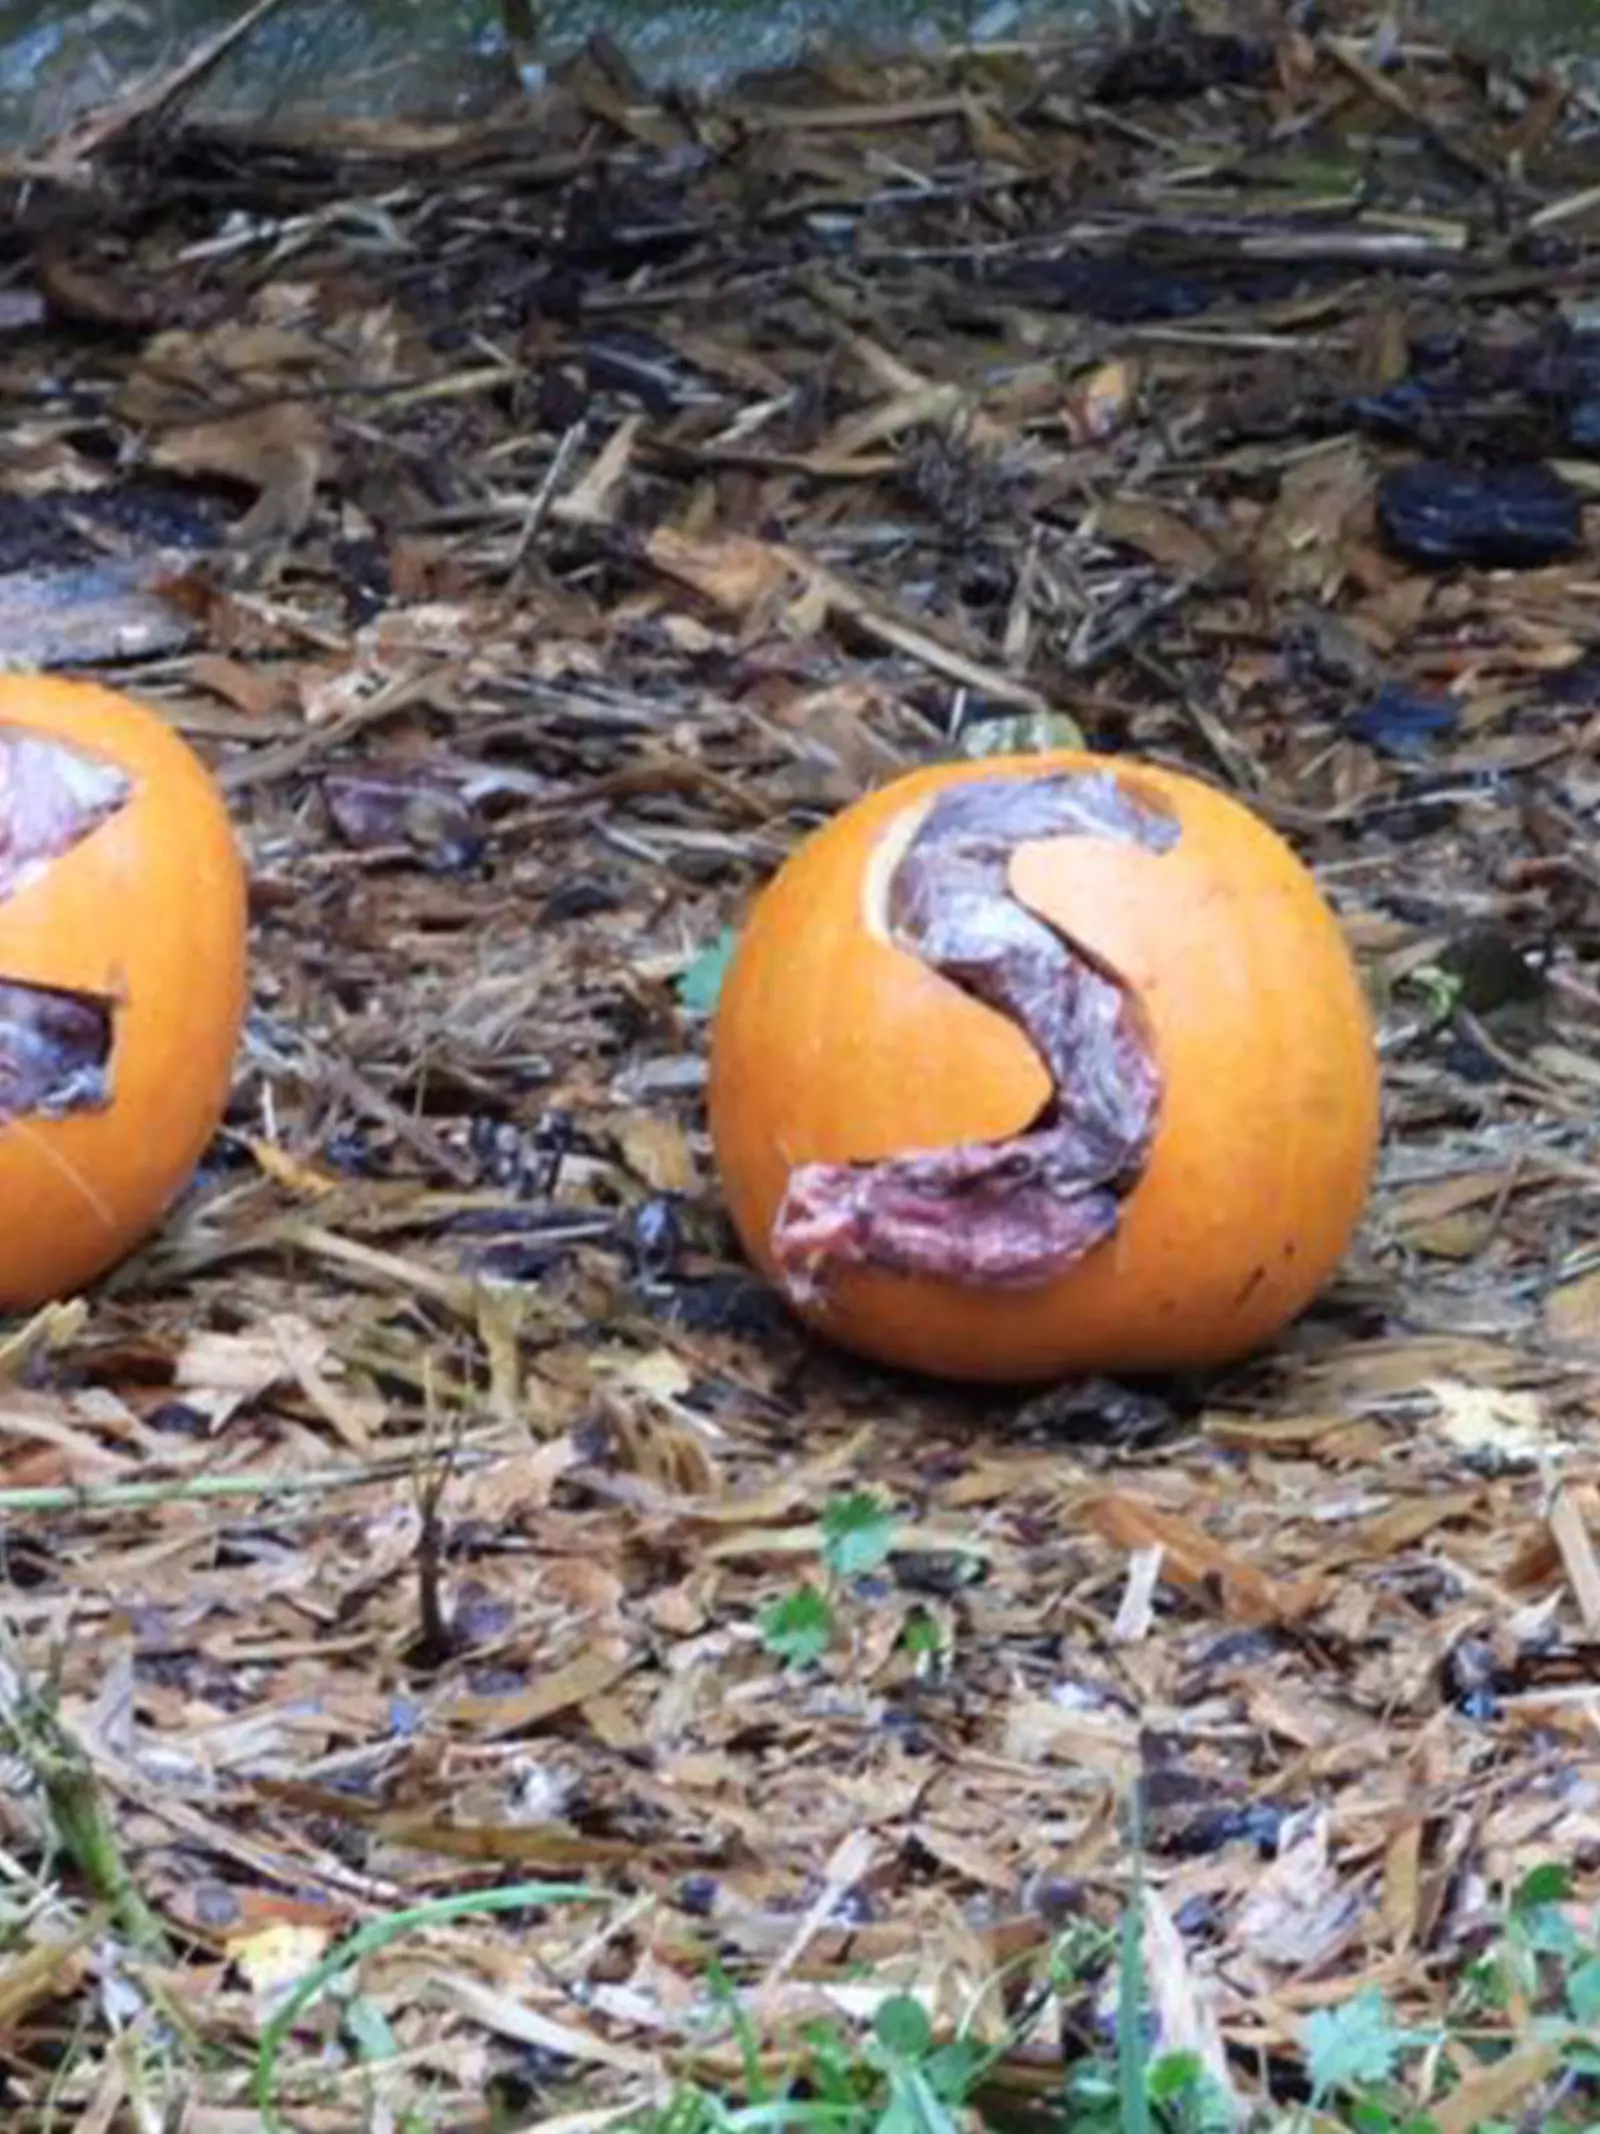 Three pumpkins carved by Zookeepers filled with treats for our animals at Whipsnade Zoo